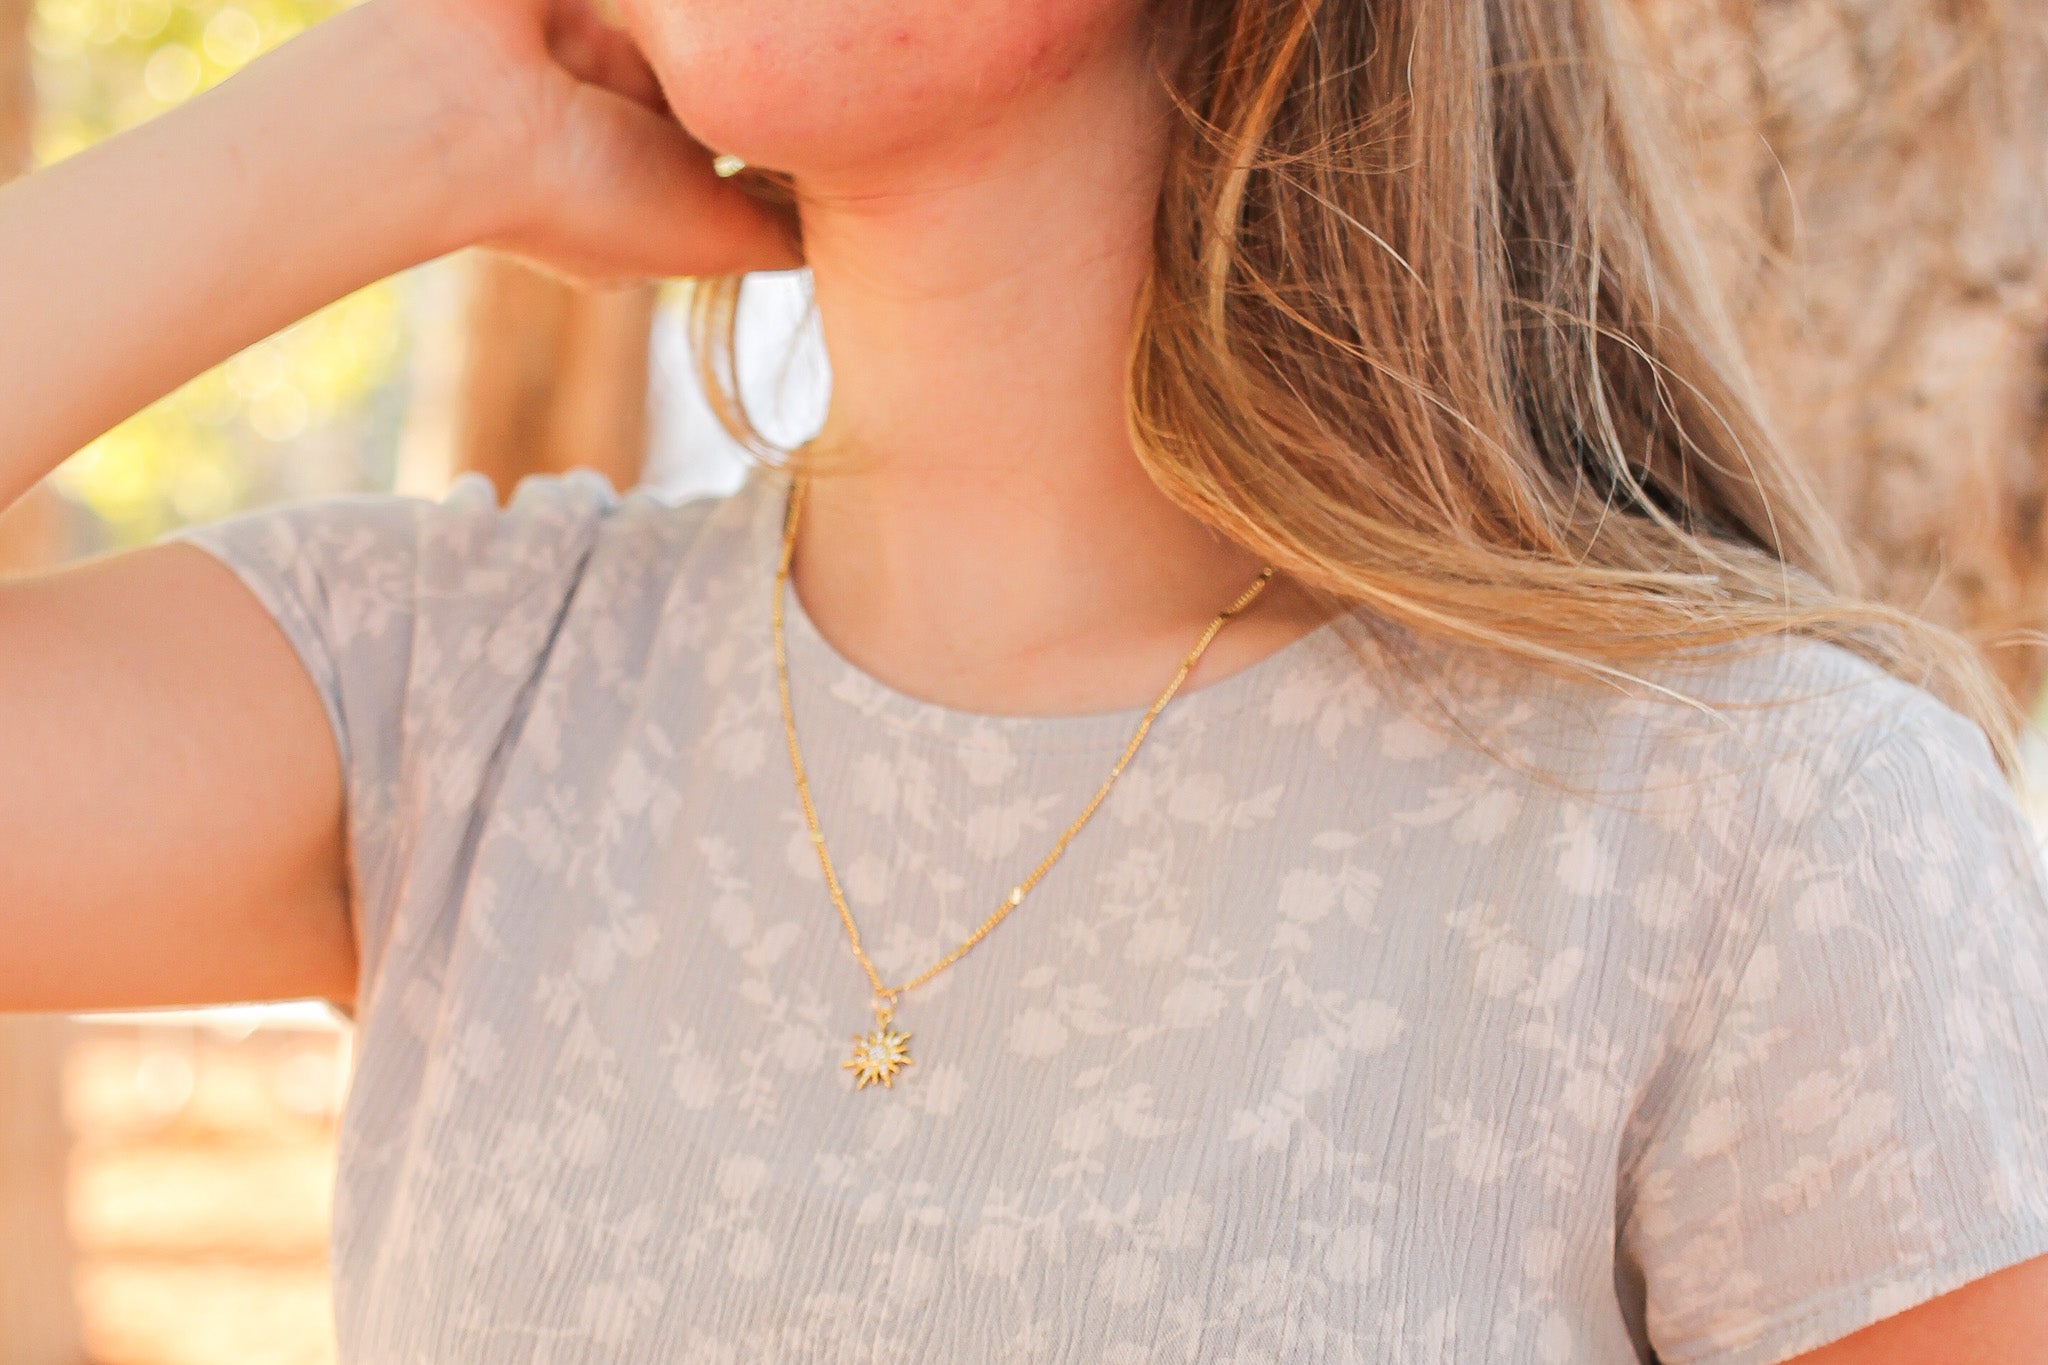 Reya Necklace in Gold Fill